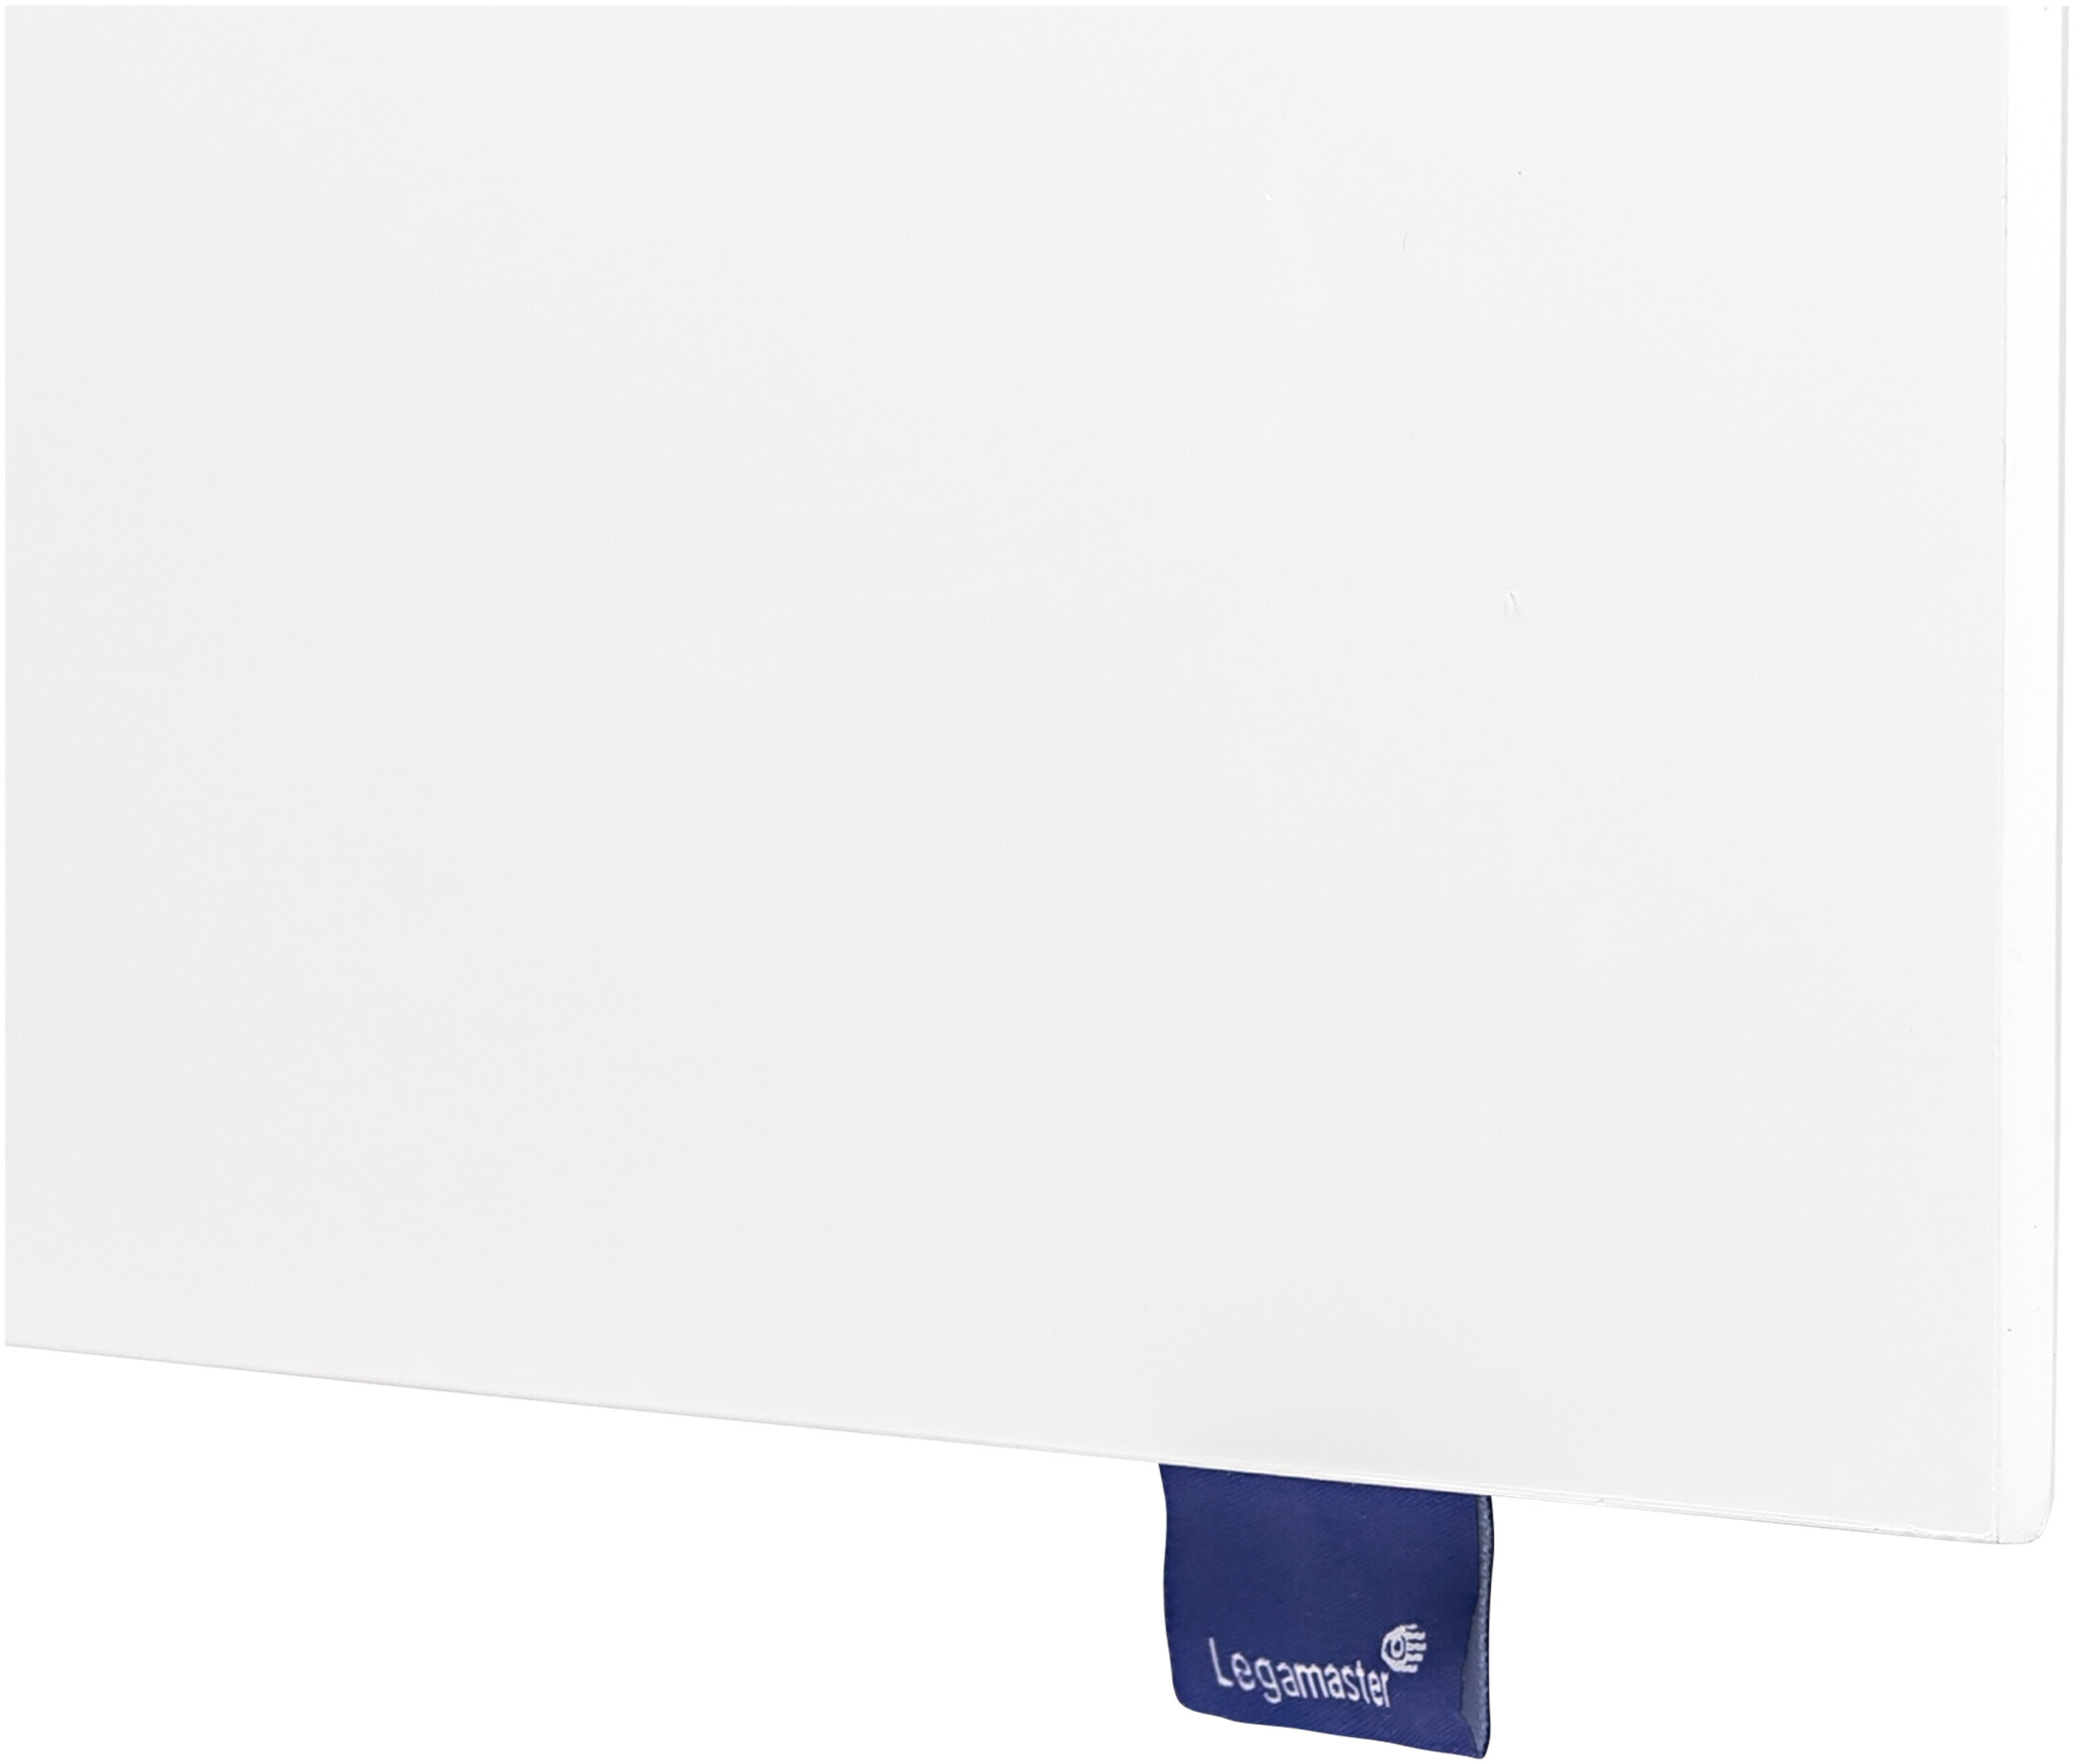 Legamaster-WALL-UP-Whiteboard-200-x-59-5-cm